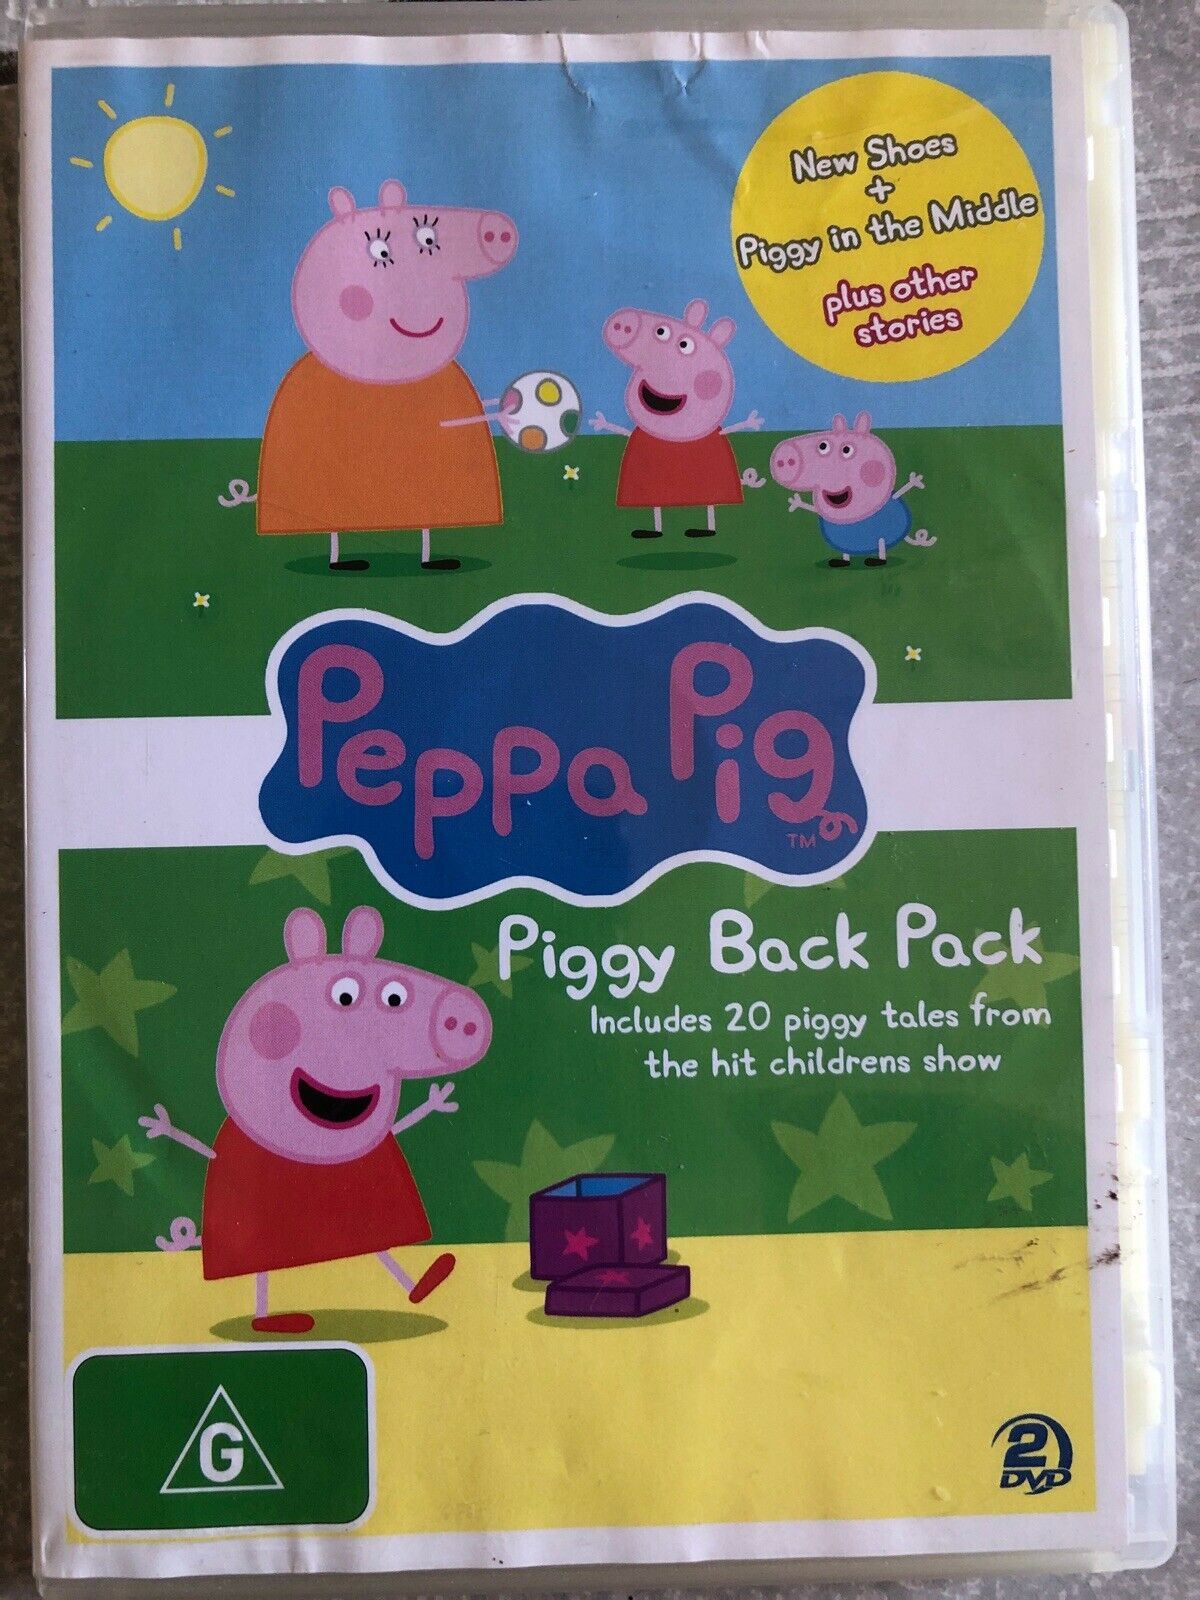 Peppa Pig - Piggy Back Pack : Collection (DVD, 6-Disc) Muddy Puddles, Flying a..